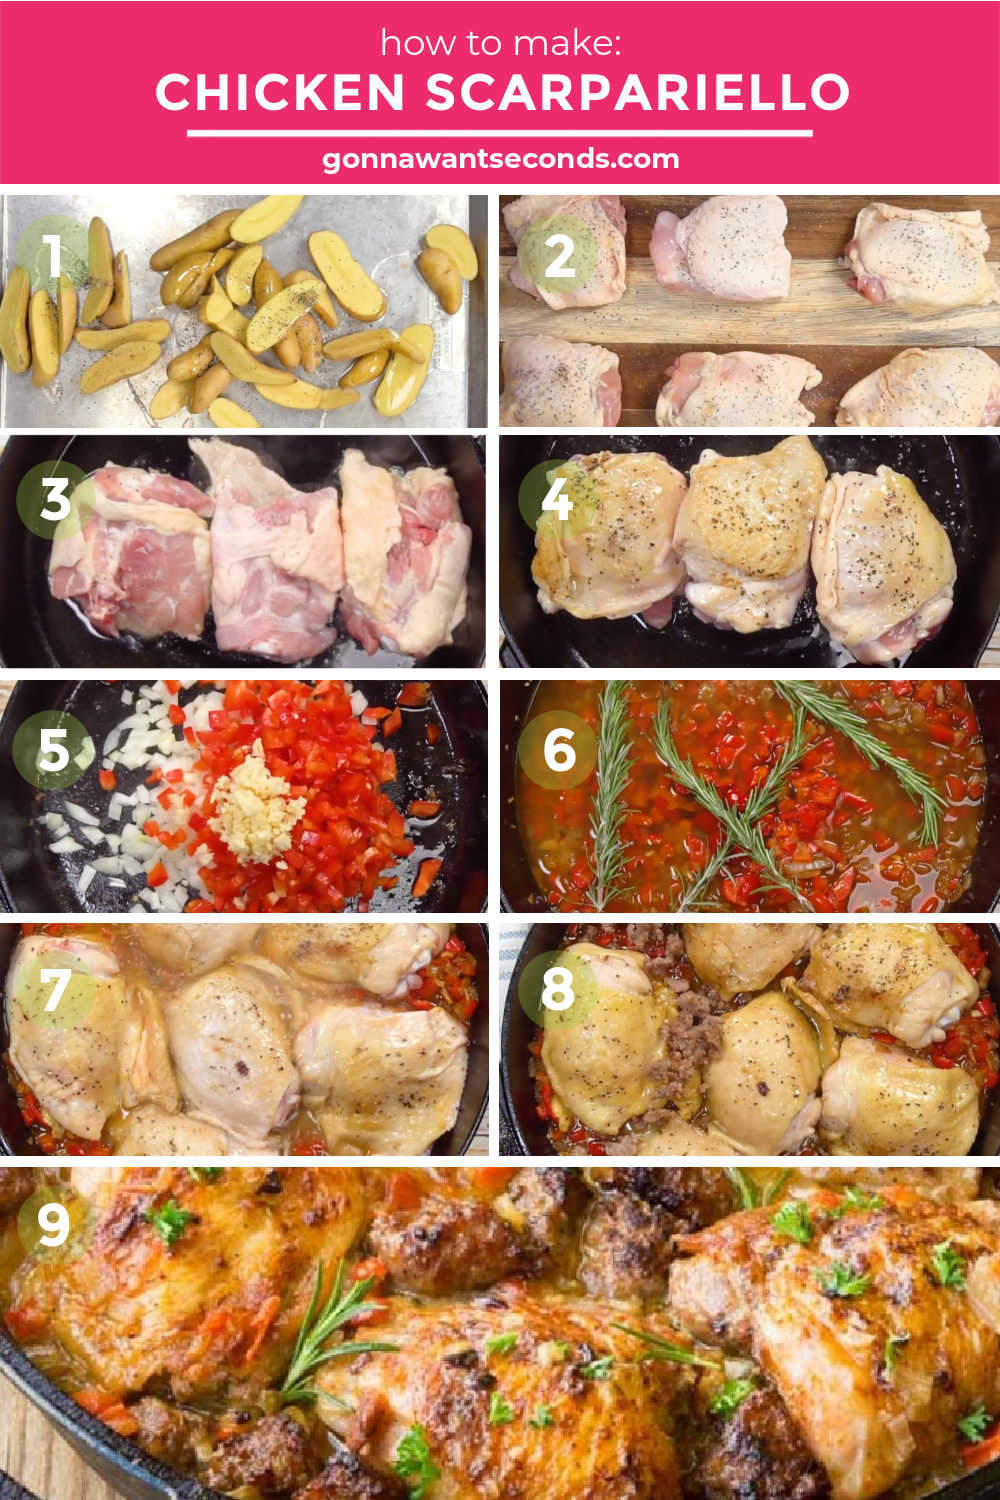 Step by step how to make chicken scarpariello